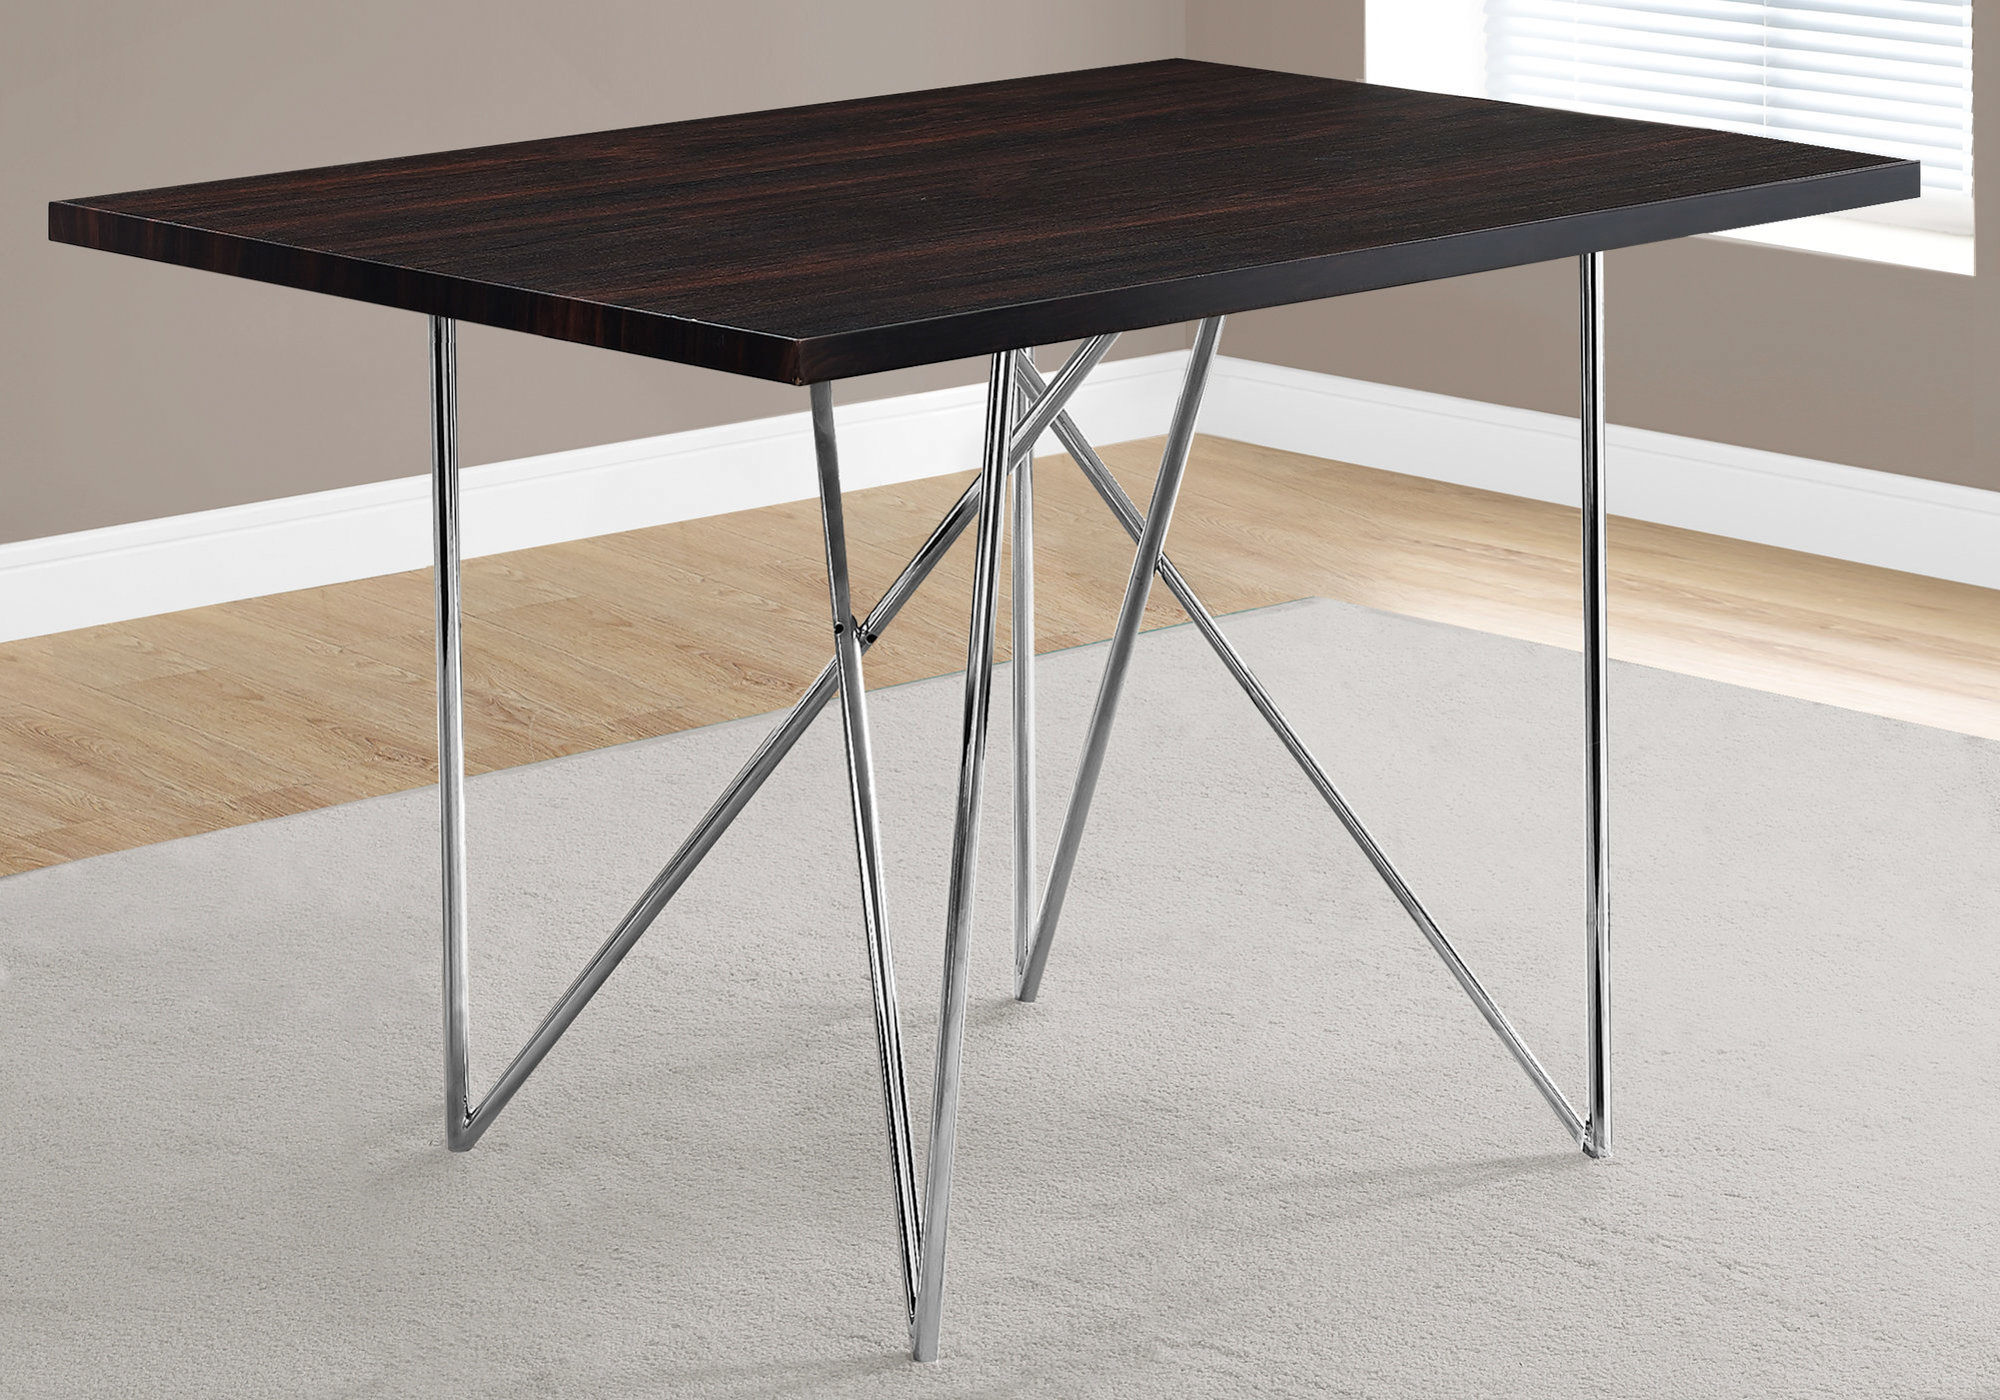 DINING TABLE - 32"X 48" / CAPPUCCINO / CHROME METAL